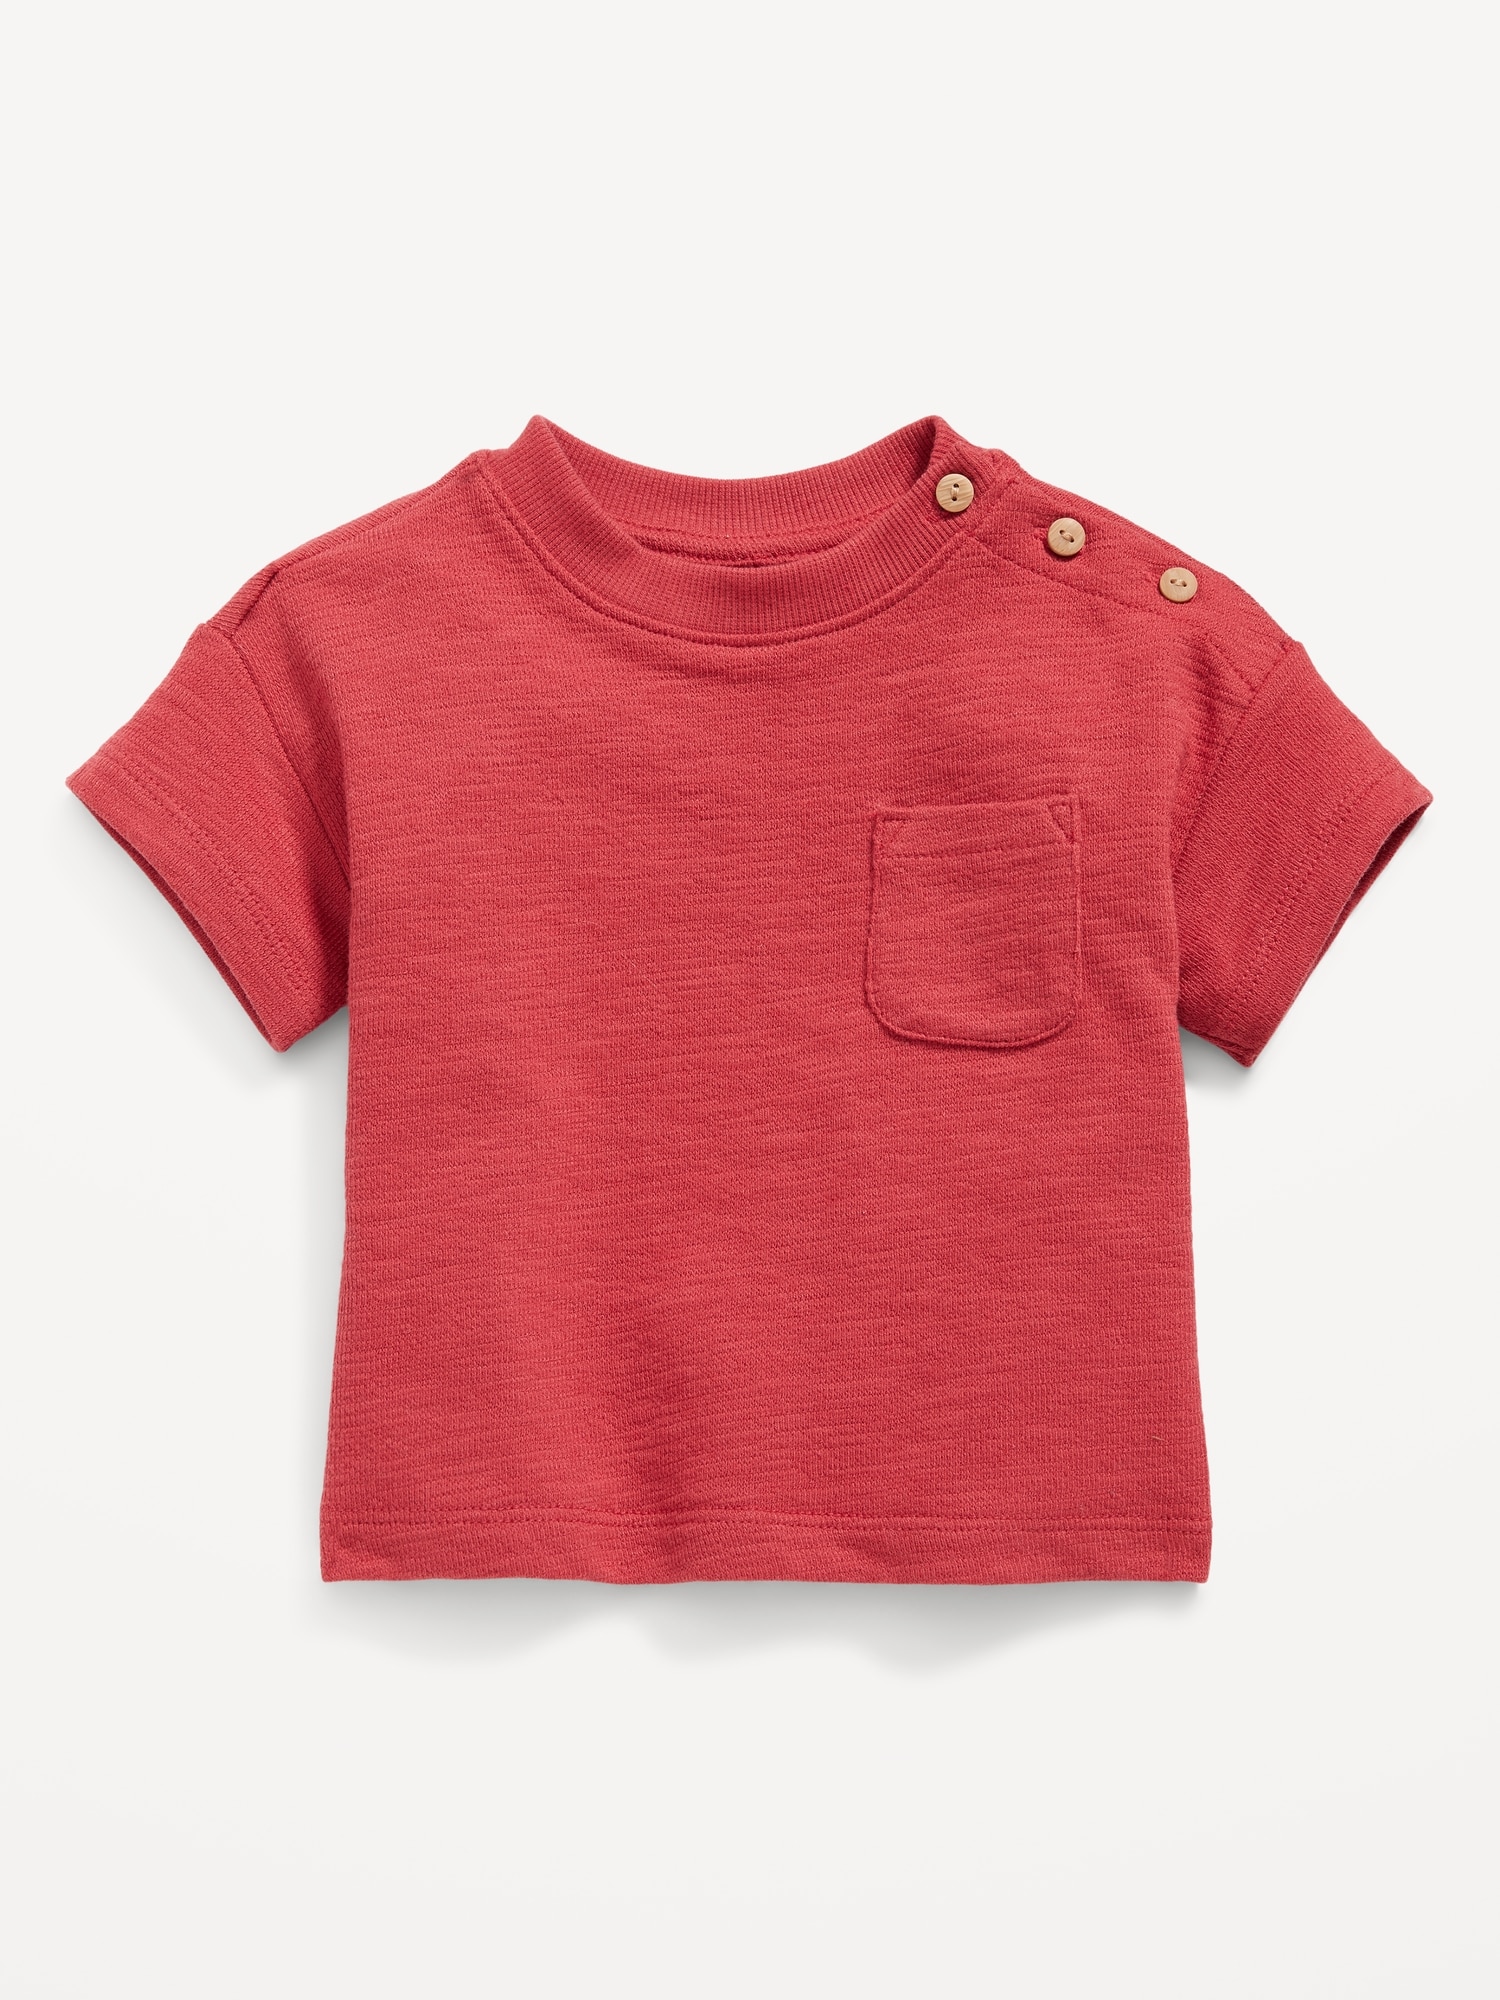 Old Navy Unisex Solid Buttoned Pocket Textured-Knit T-Shirt for Baby red. 1